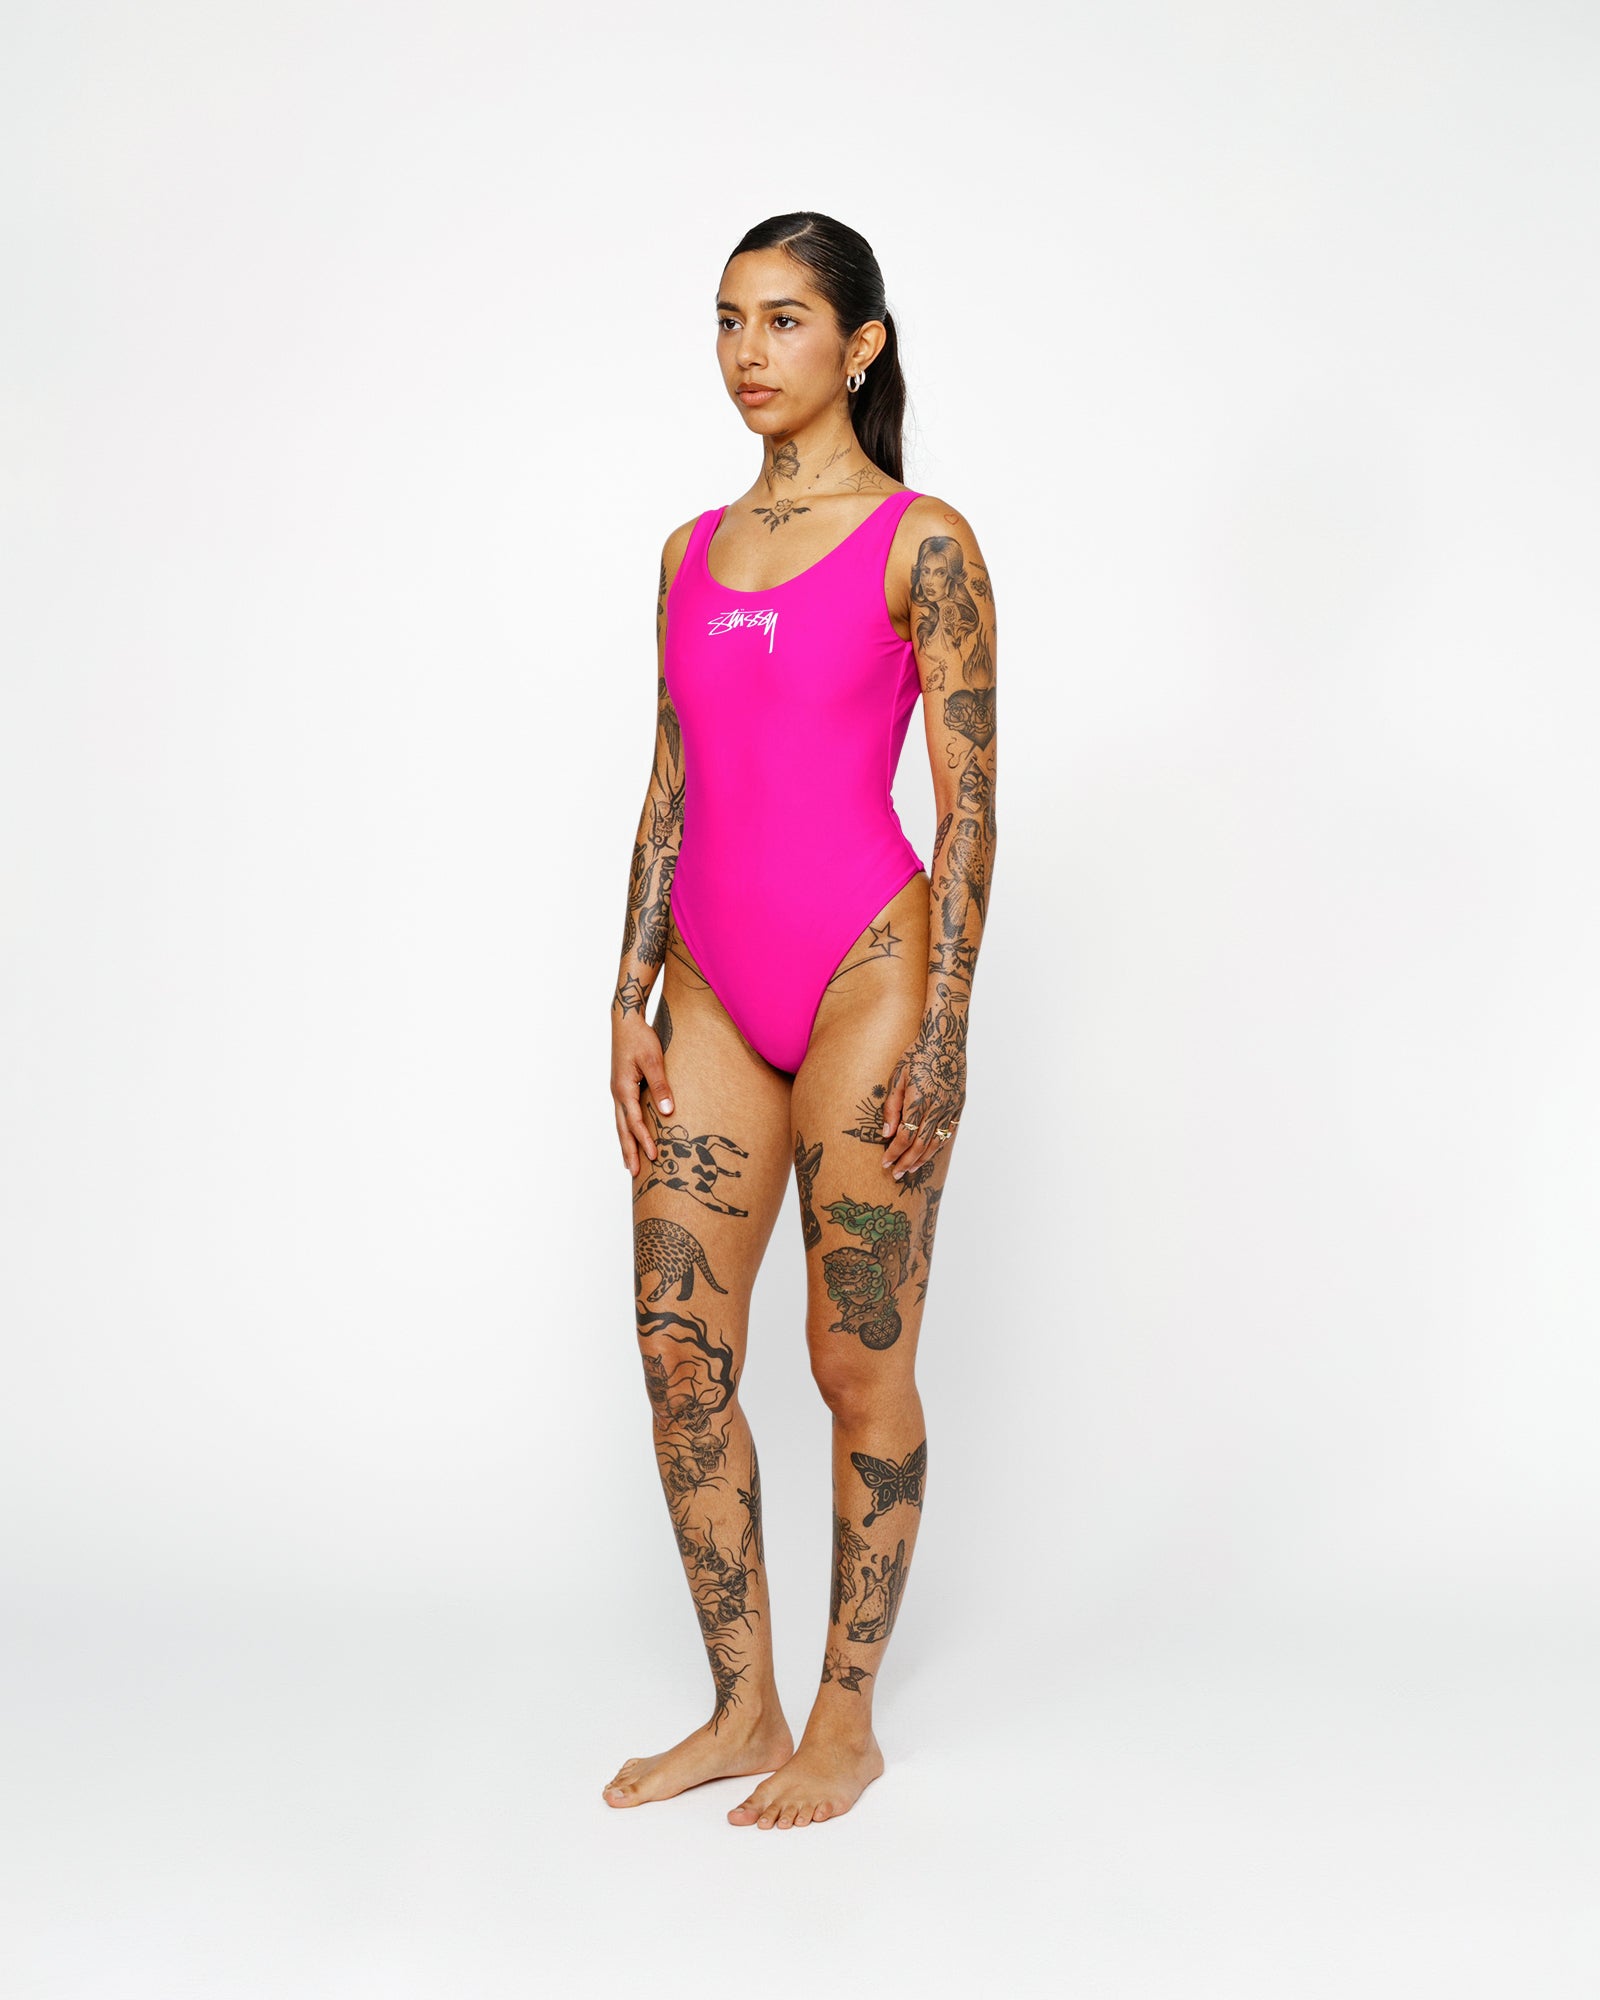 SURF STOCK ONE PIECE SWIMSUIT